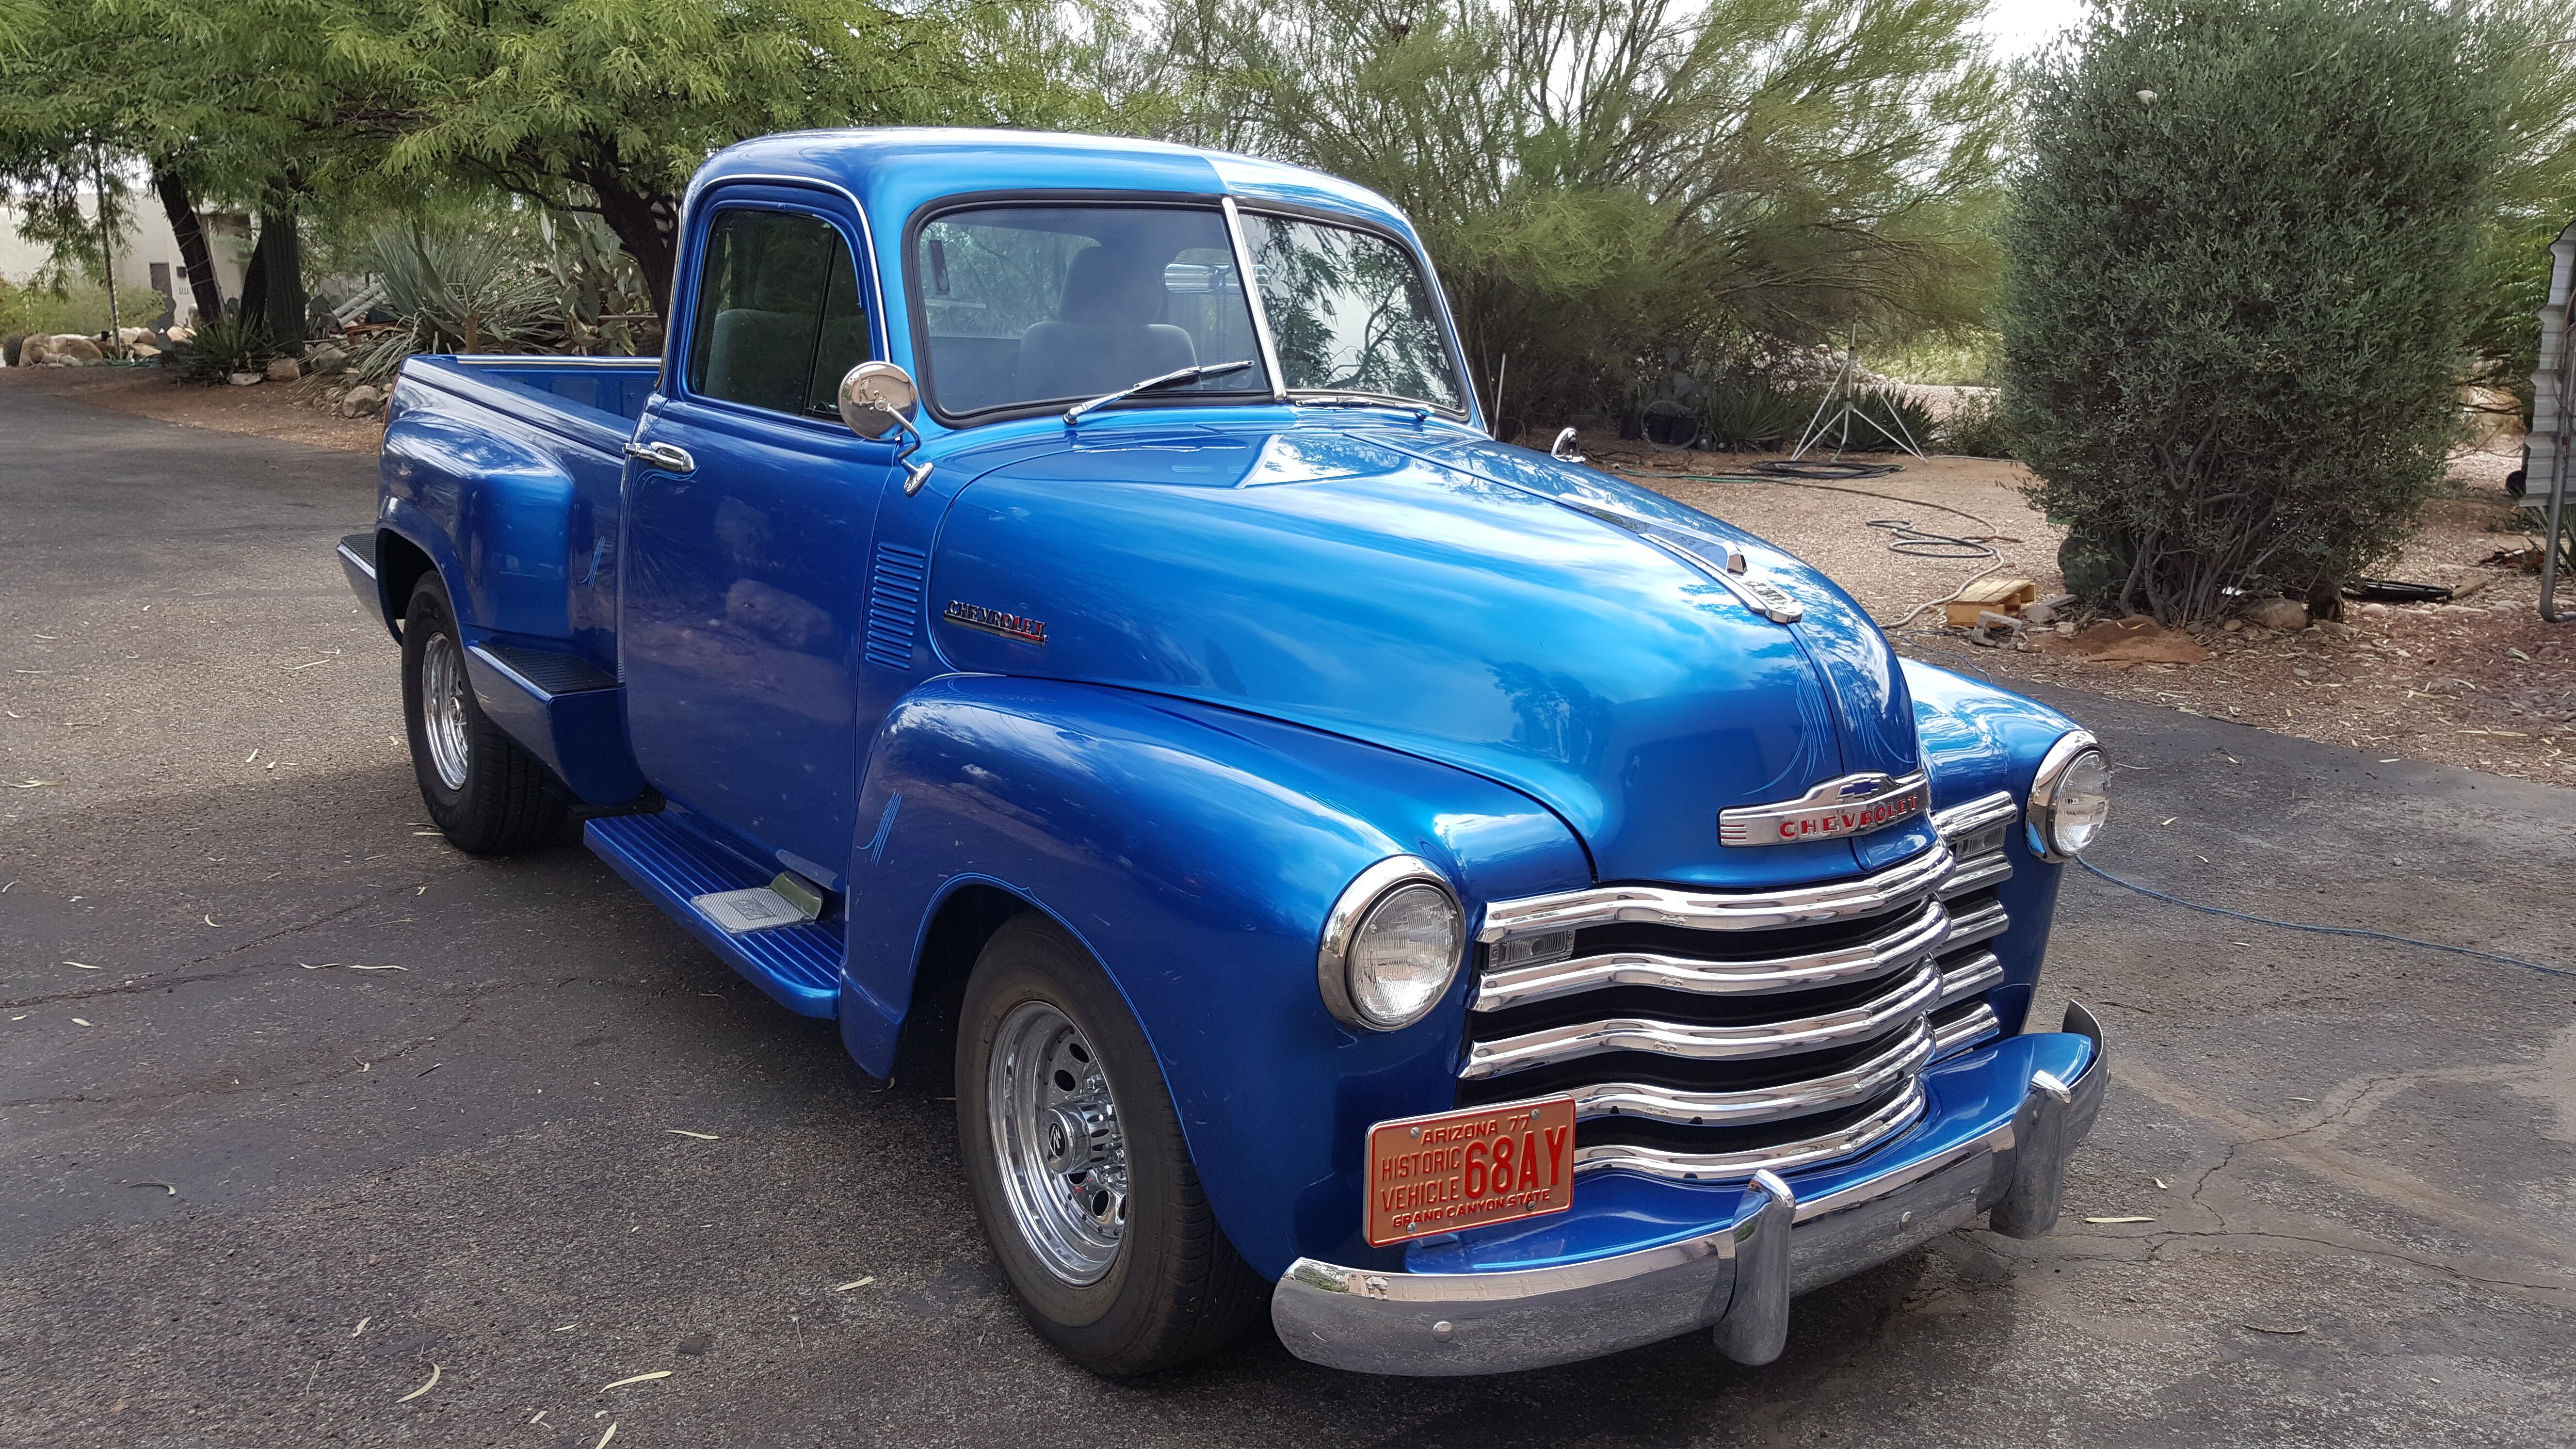 1950 Chevy Truck For Sale Craigslist Los Angeles - GeloManias